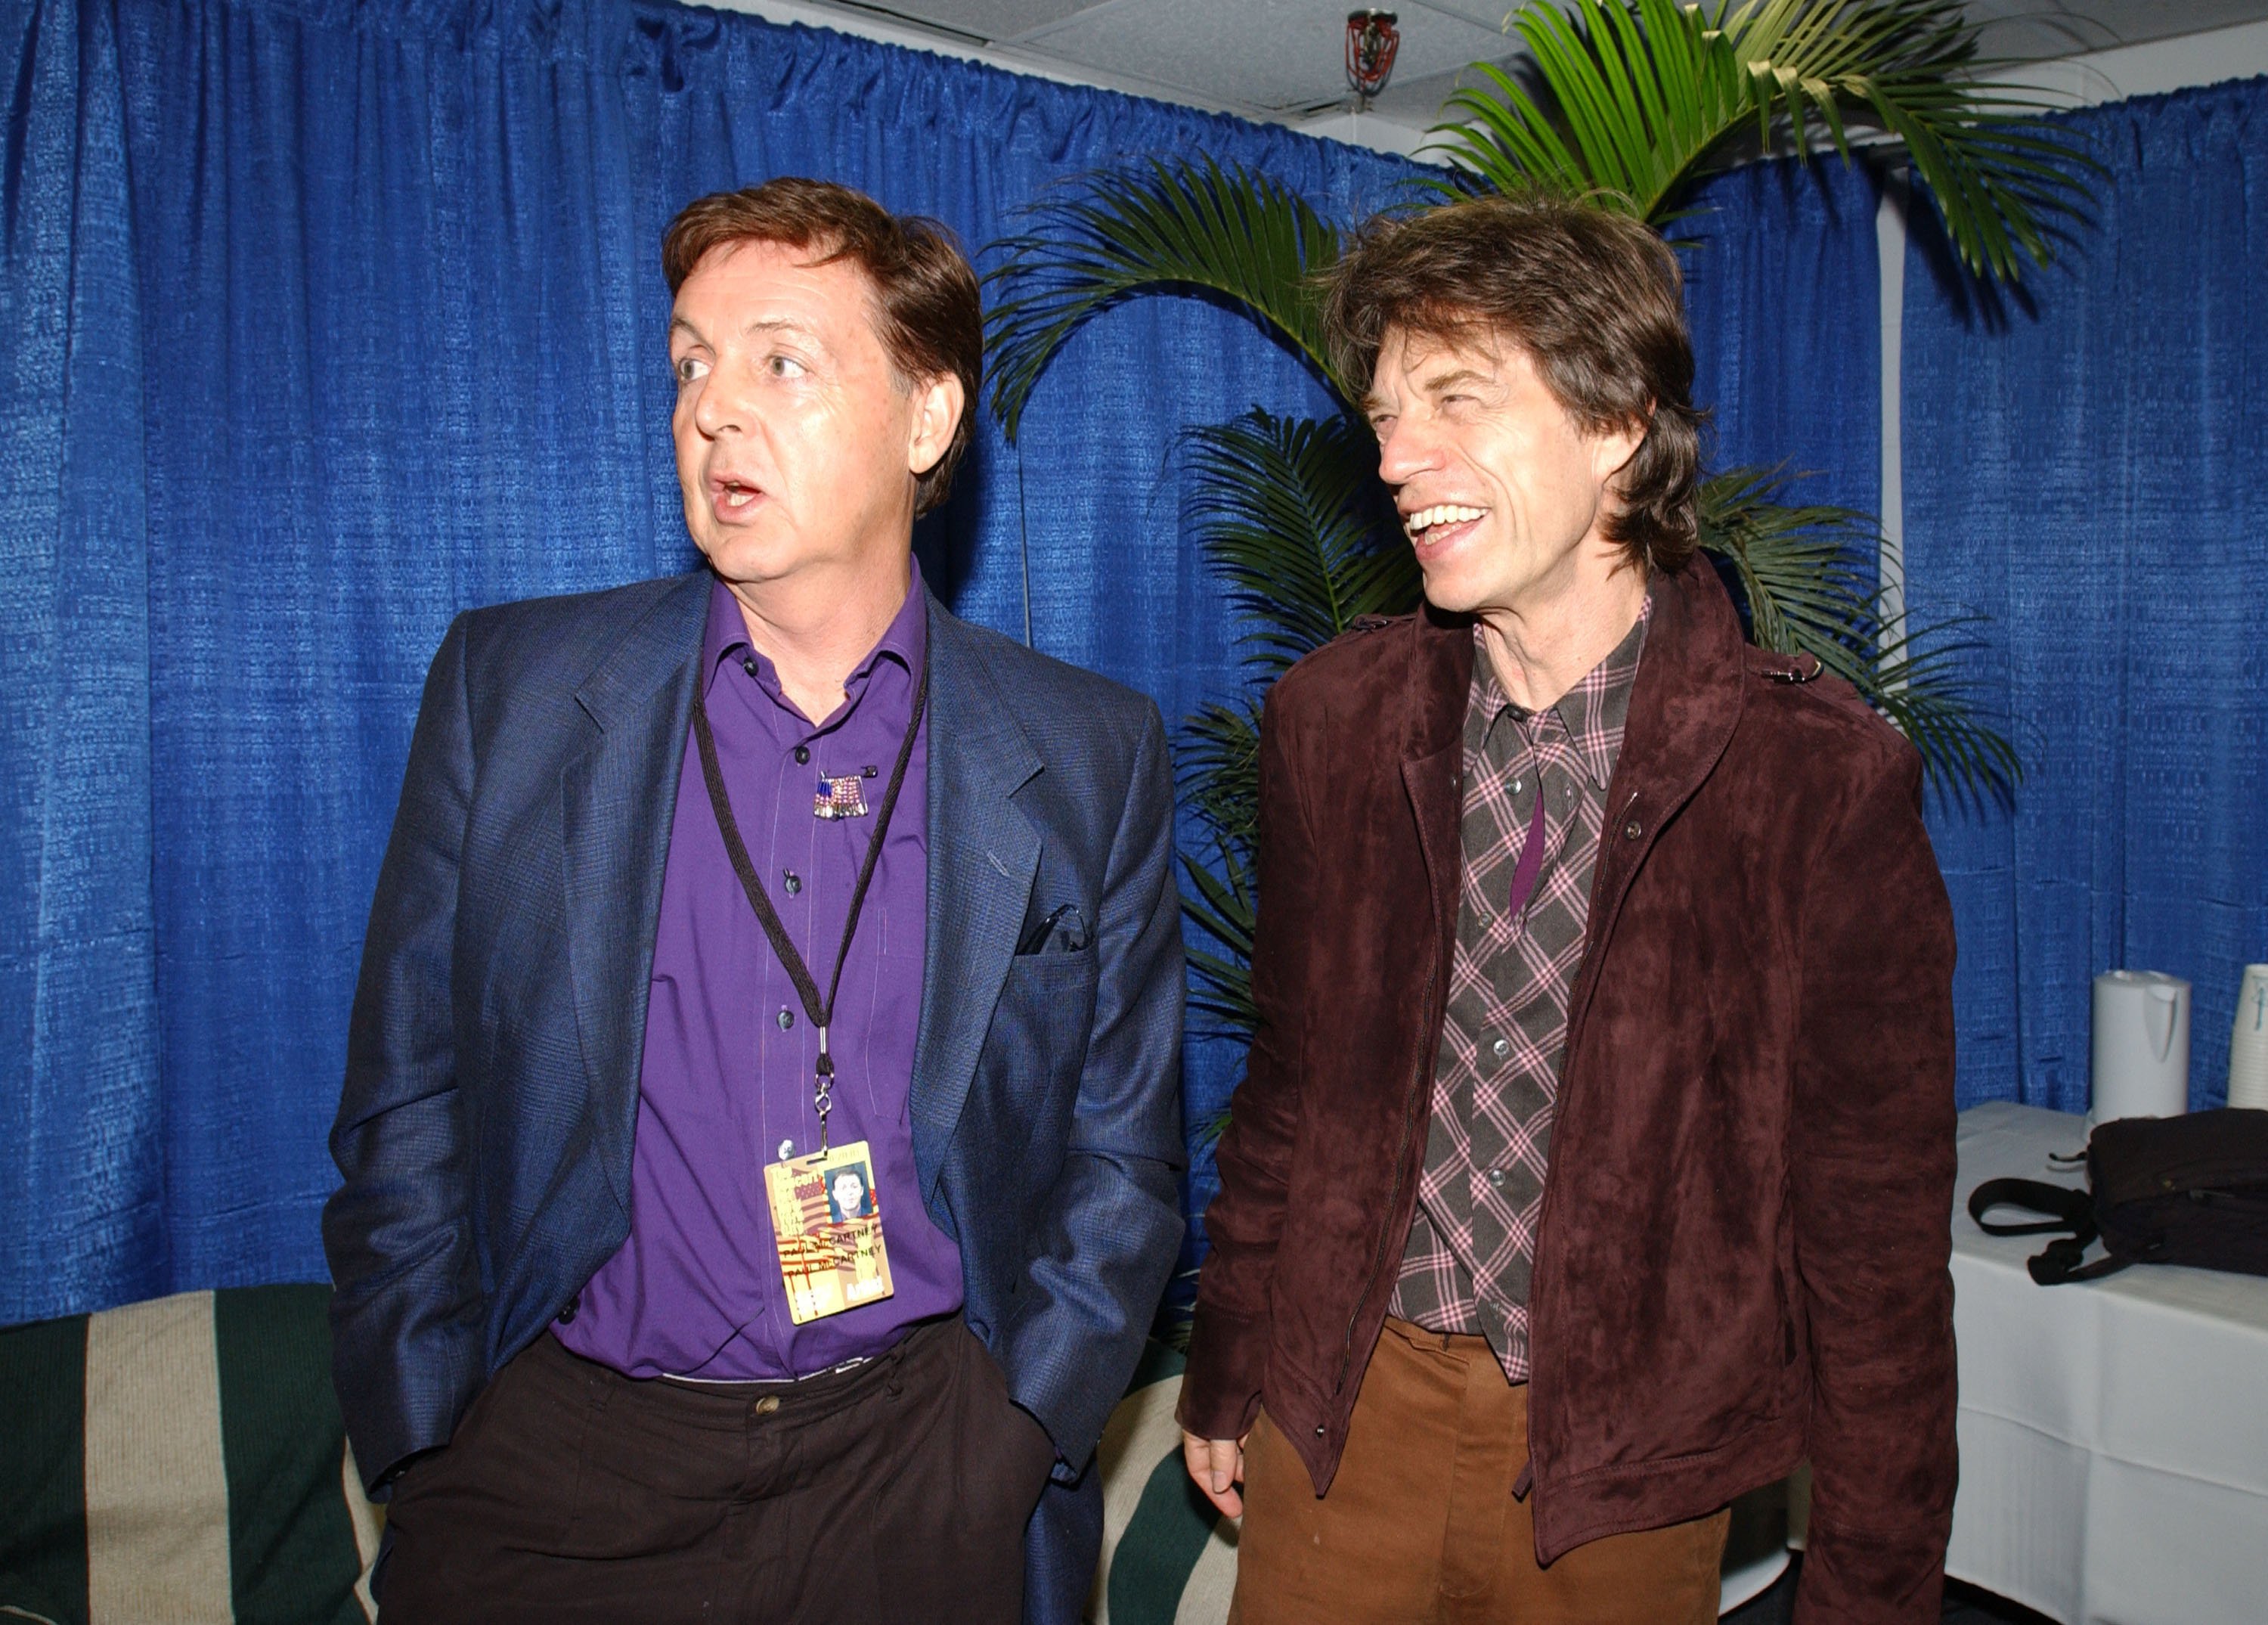 Paul McCartney of The Beatles and Mick Jagger of The Rolling Stones at Madison Square Garden in New York City